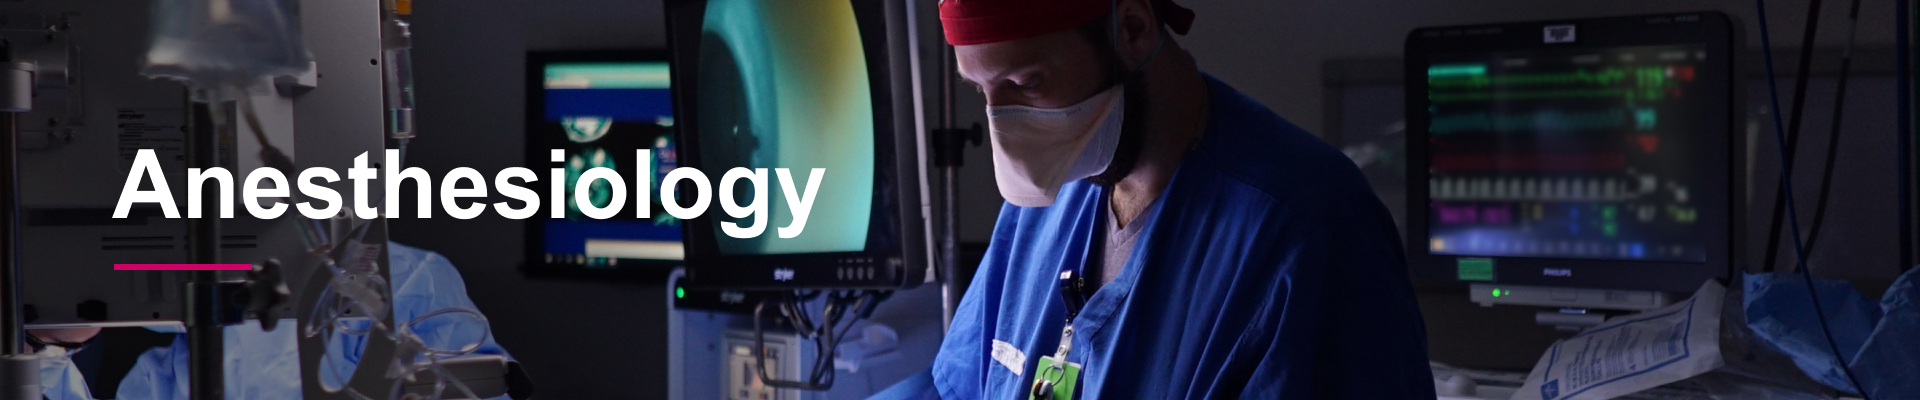 Fellowships in Anesthesiology